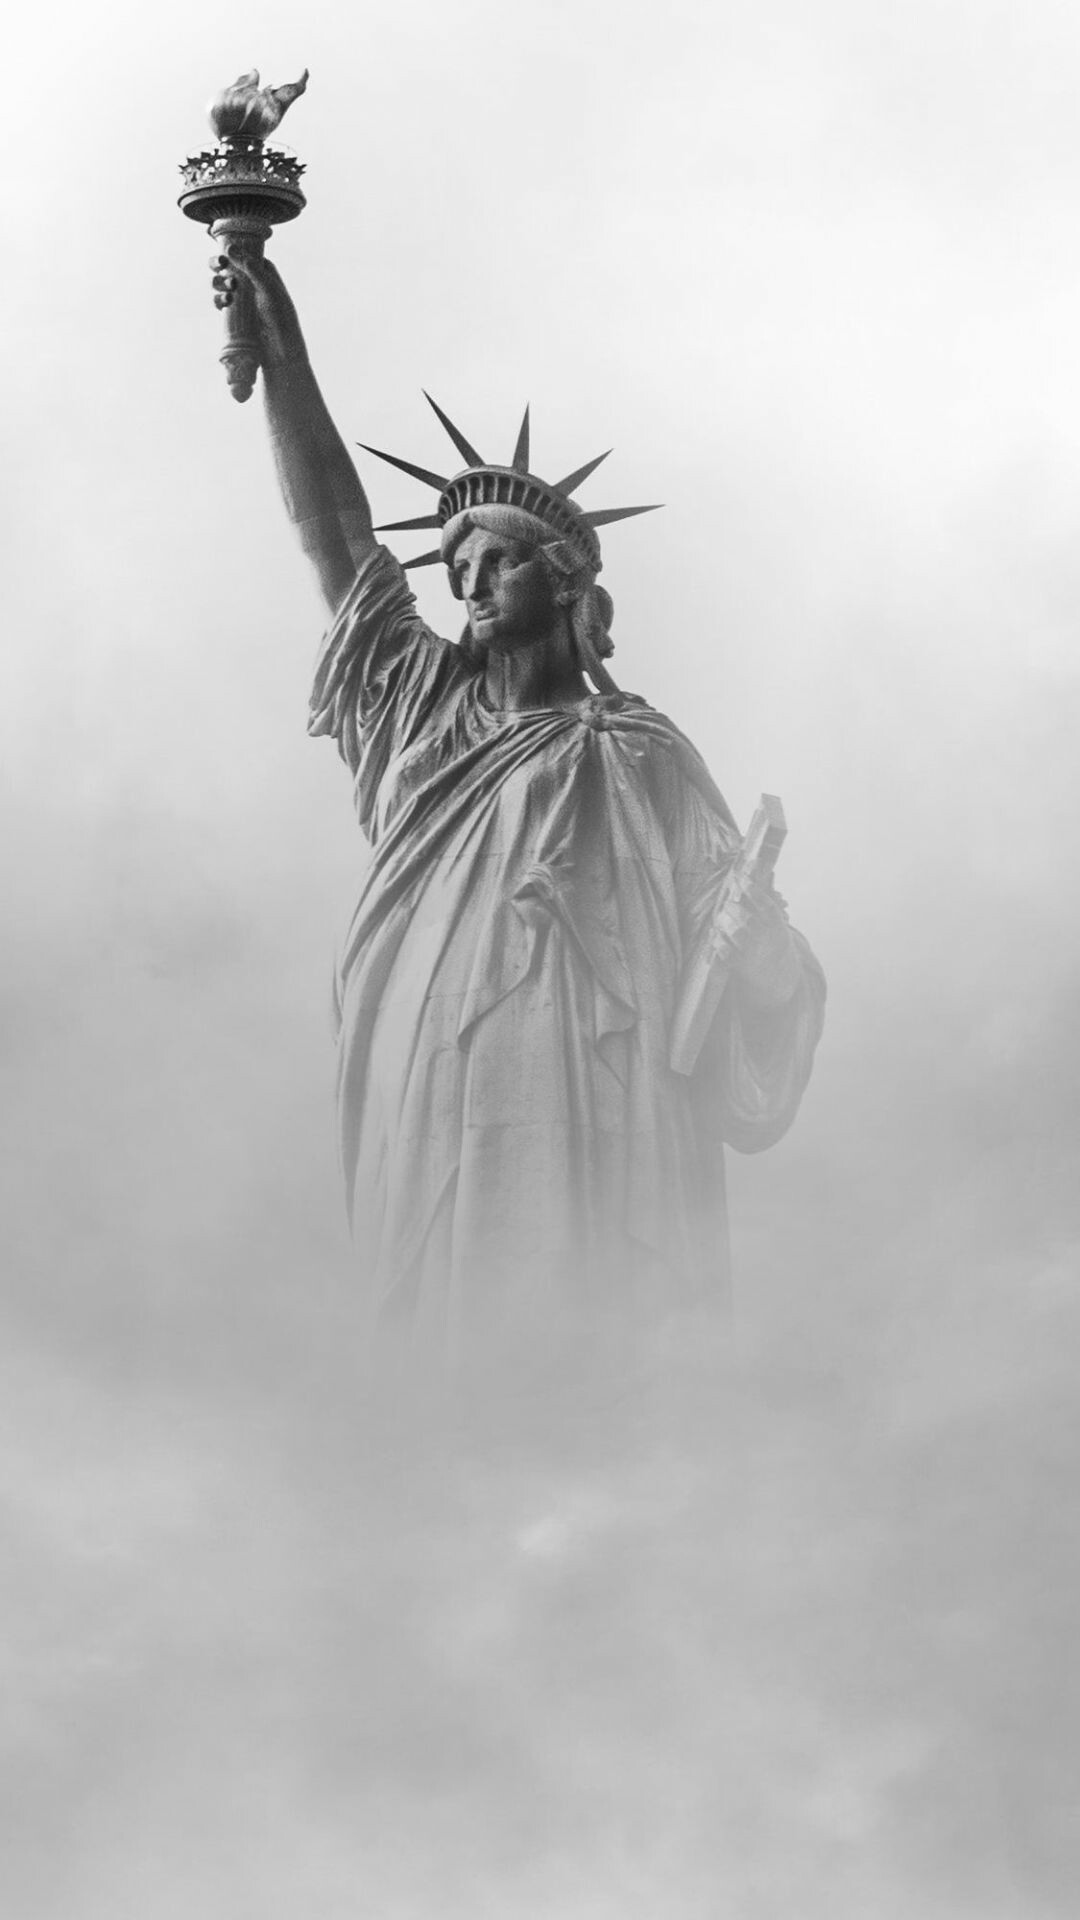 Statue of Liberty: Gifted by France to the United States in 1886, Sculpture, Monochrome. 1080x1920 Full HD Background.